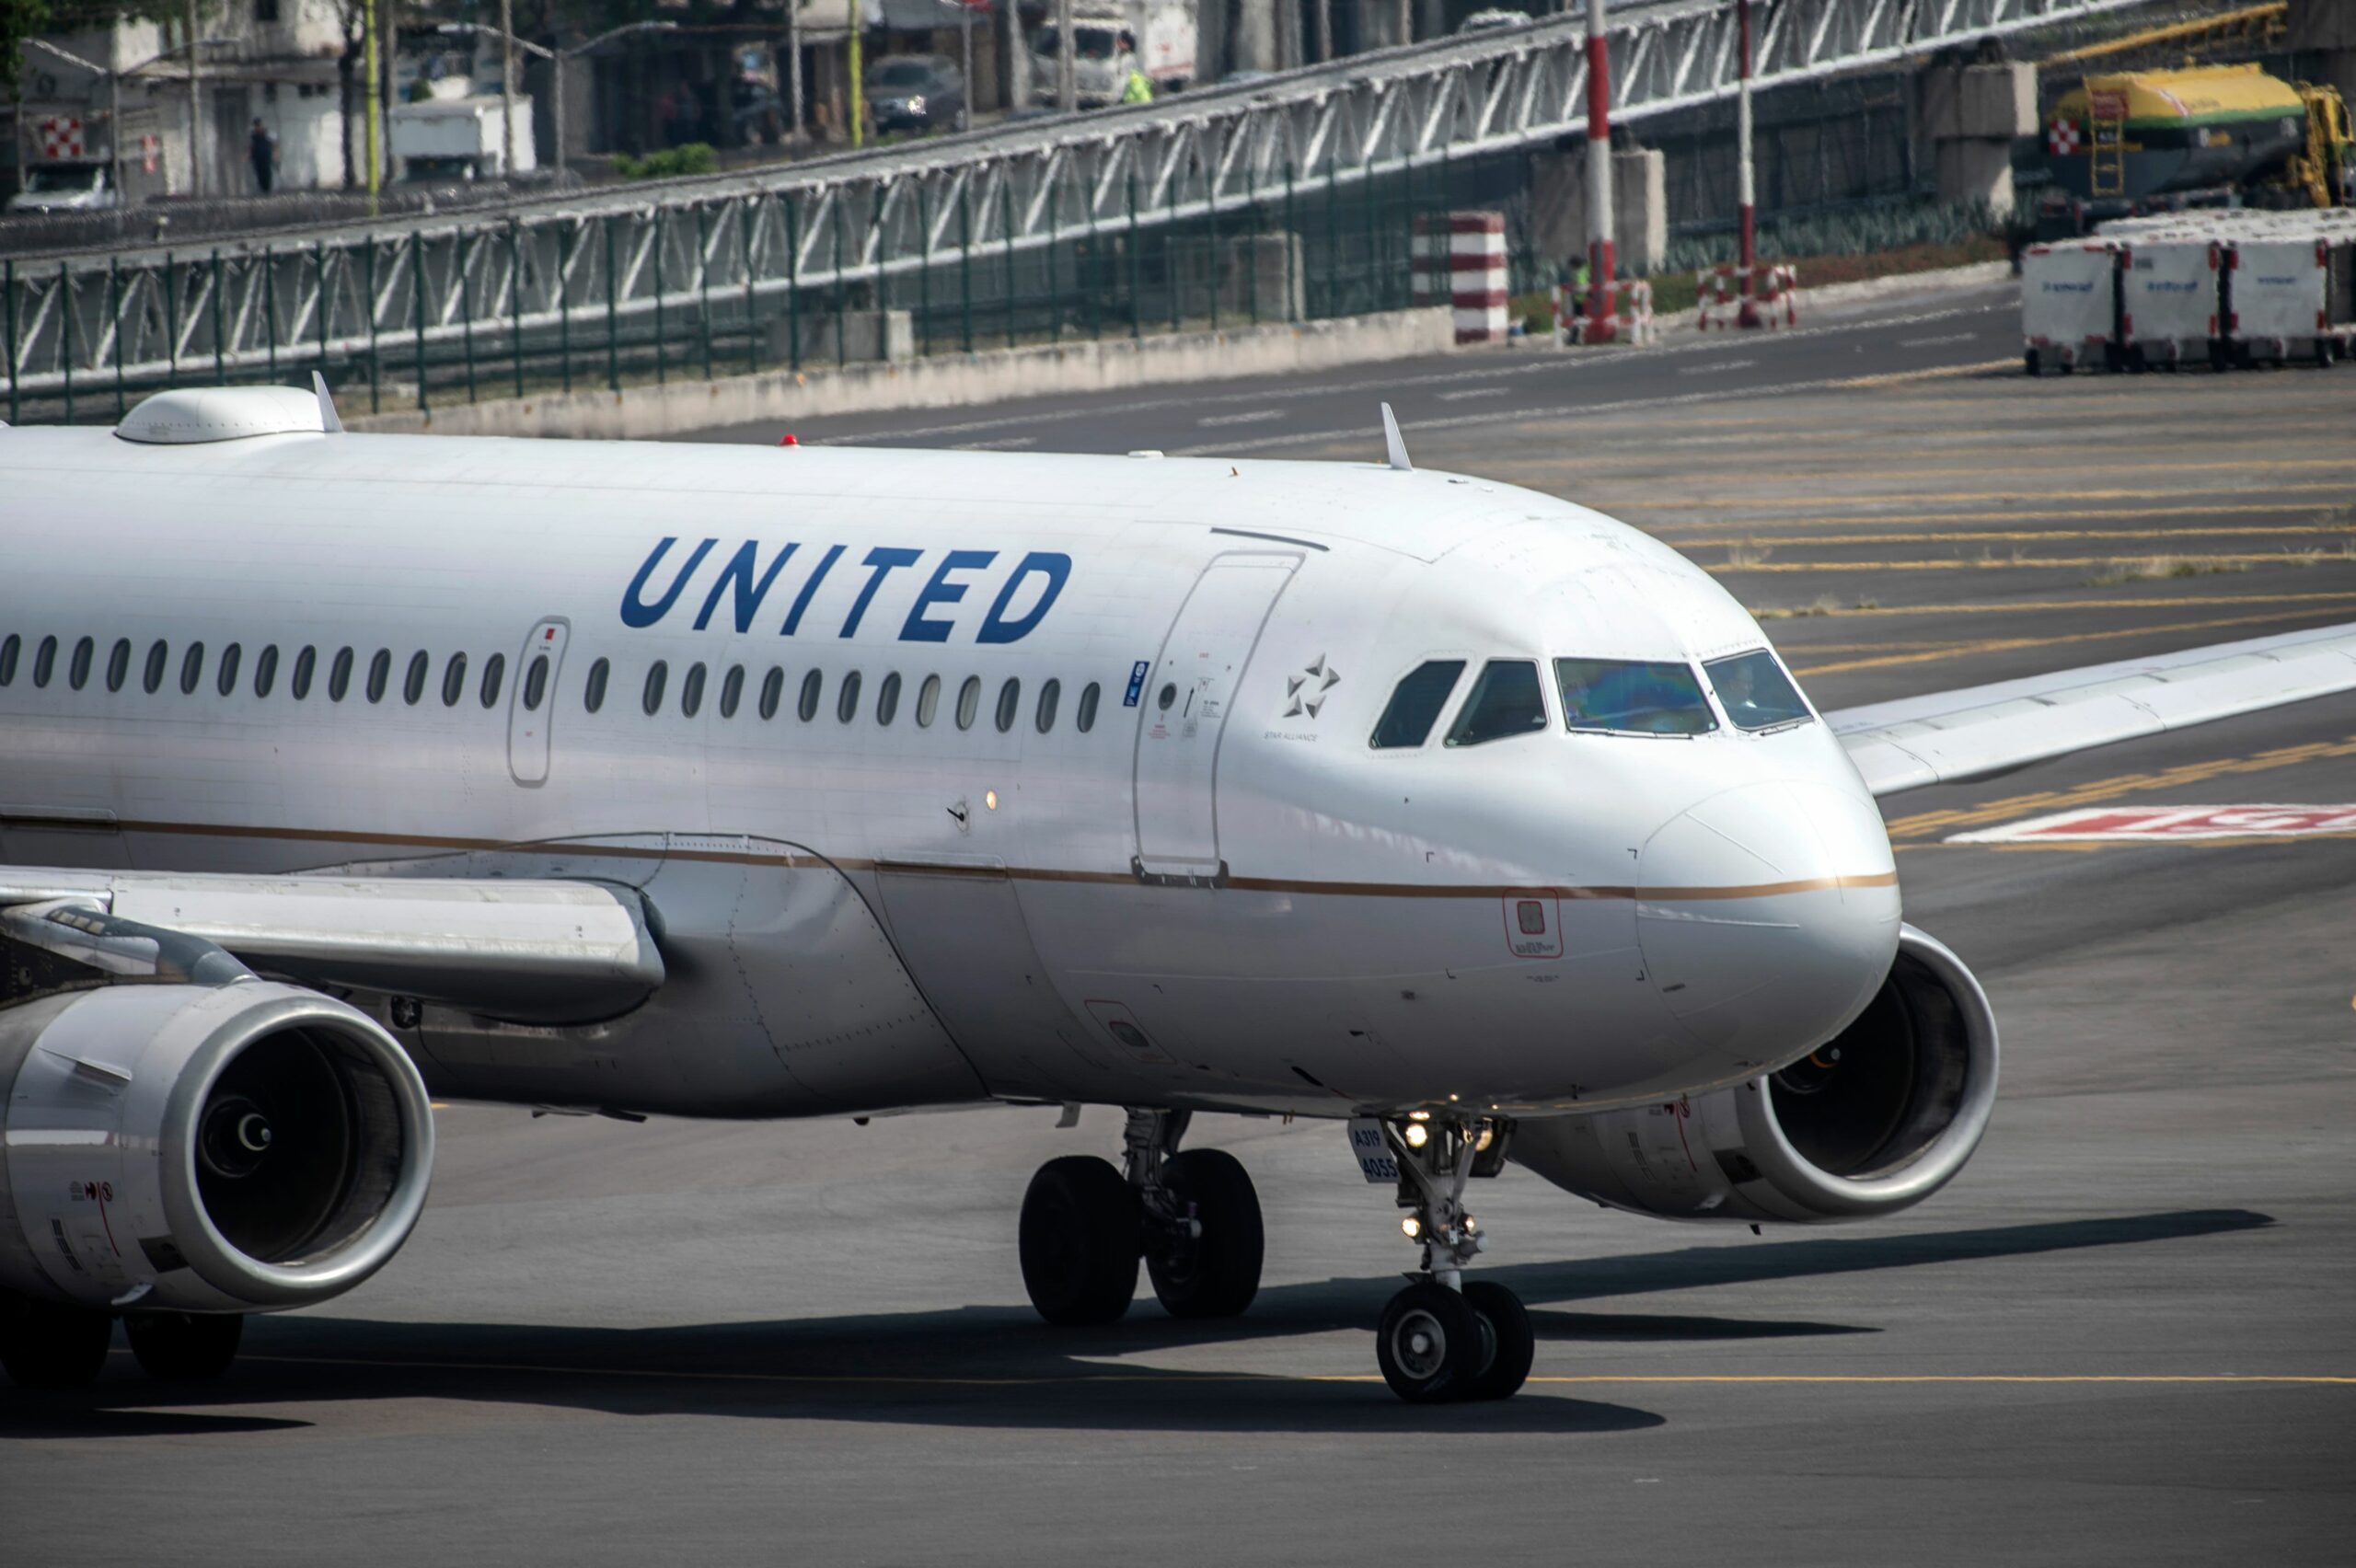 United Airlines (UAL) reports 3Q 21 revenue above expectations